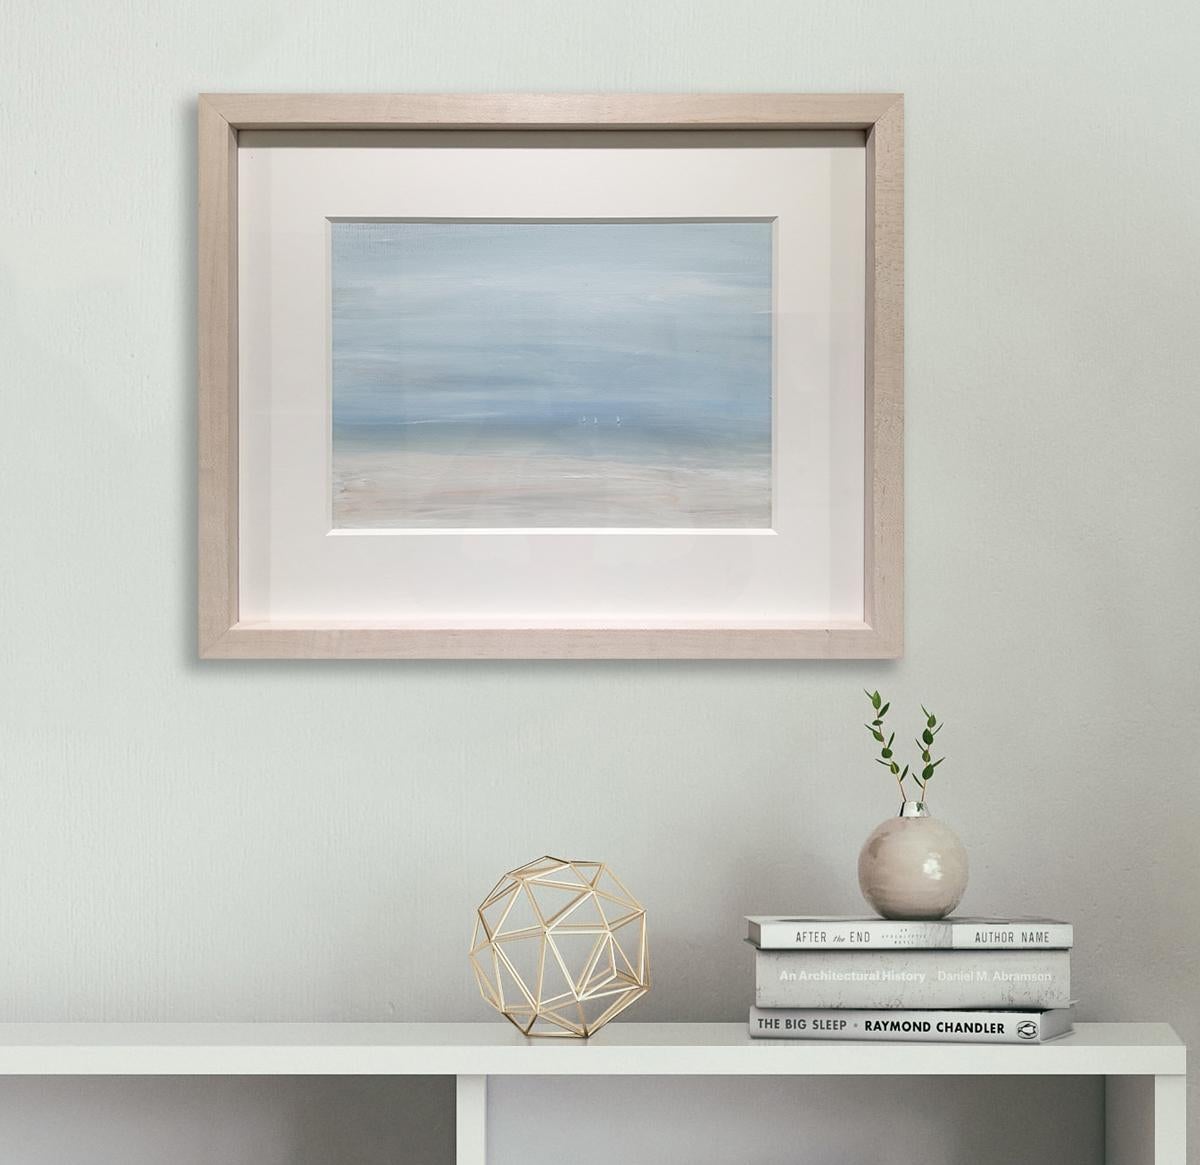 This contemporary seascape painting by S.C. Aldo is made with acrylic paint on Arches paper. It features a coastal scene with a light blue sky and three small sailboats just visible along the horizon. The painting is matted with a 6-ply white rag